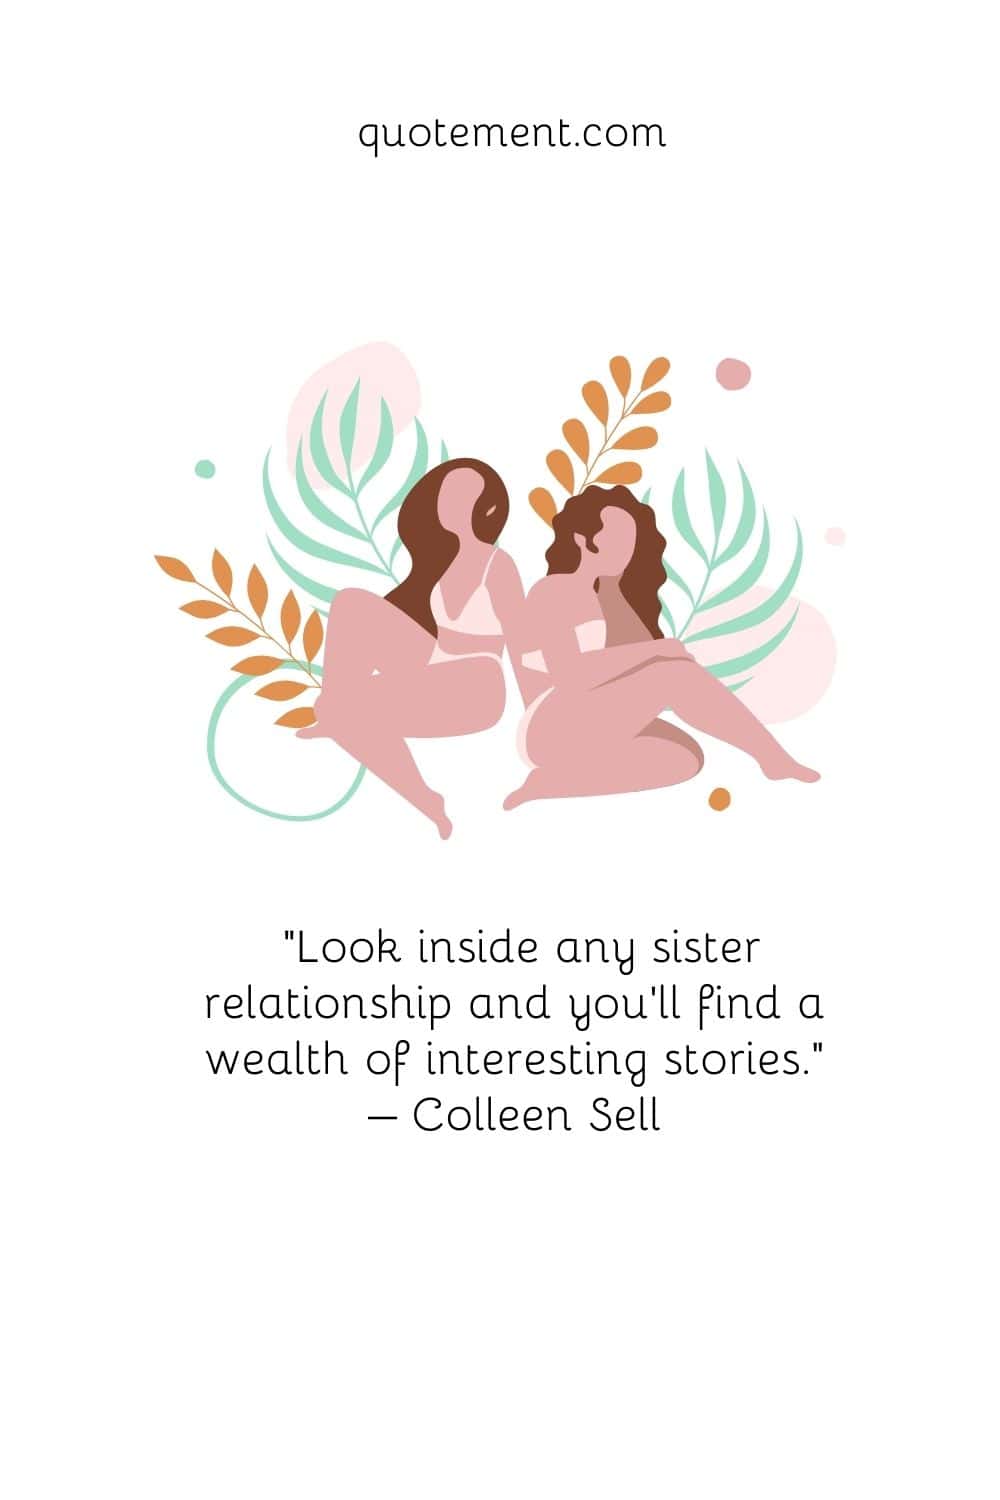 “Look inside any sister relationship and you’ll find a wealth of interesting stories.” – Colleen Sell